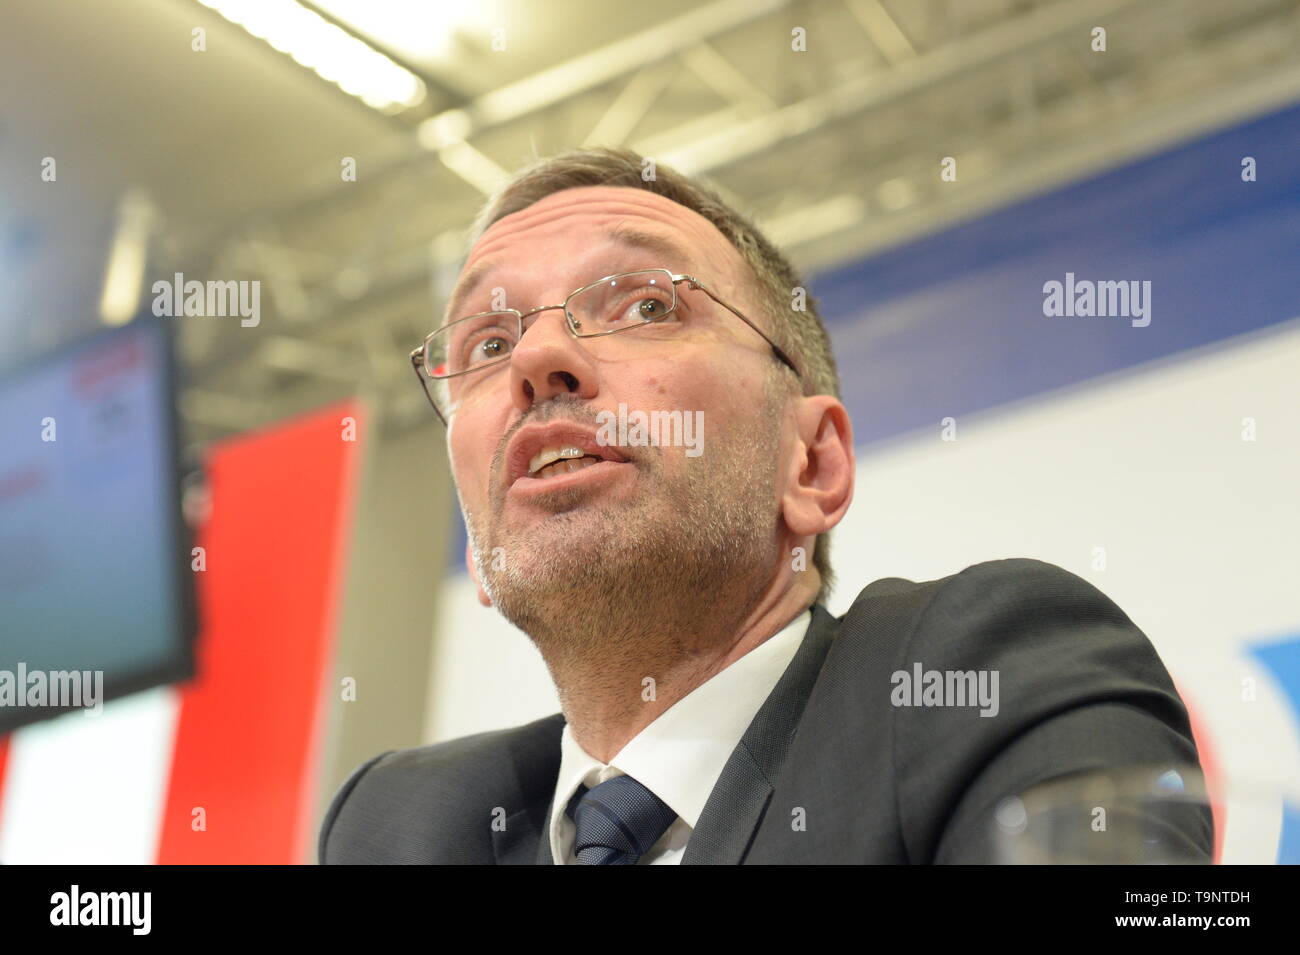 Vienna, Austria. 20th May, 2019. Press release of the FPÖ (Freedom Party of Austria).  Picture shows Interior Minister Herbert Kick( FPÖ). Credit: Franz Perc/Alamy Live News Stock Photo